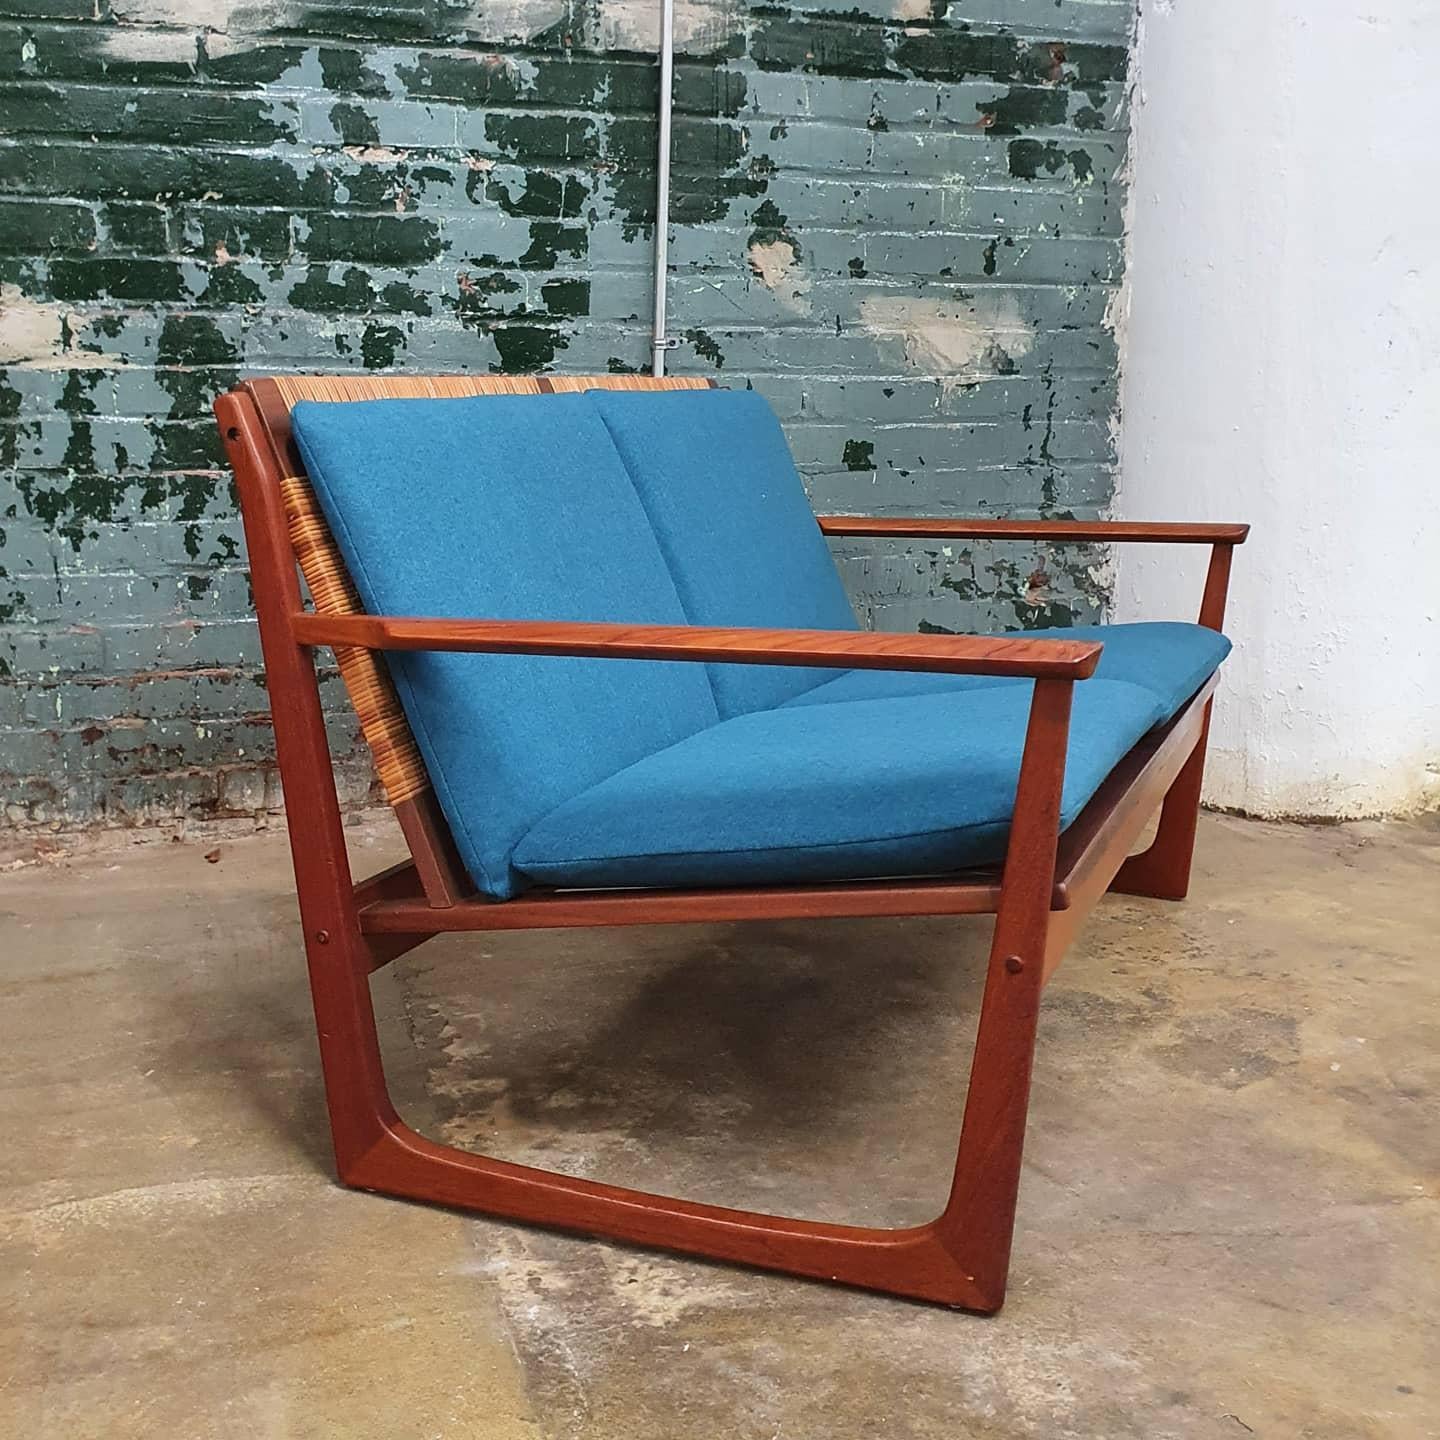 Beautiful danish teak settee by Hans Olsen. New teal wool upholstery. the seat cords have been replaced. newly woven cane seat back done by a professional caner. This chair is a comfortable statement piece and would look great in a variety of